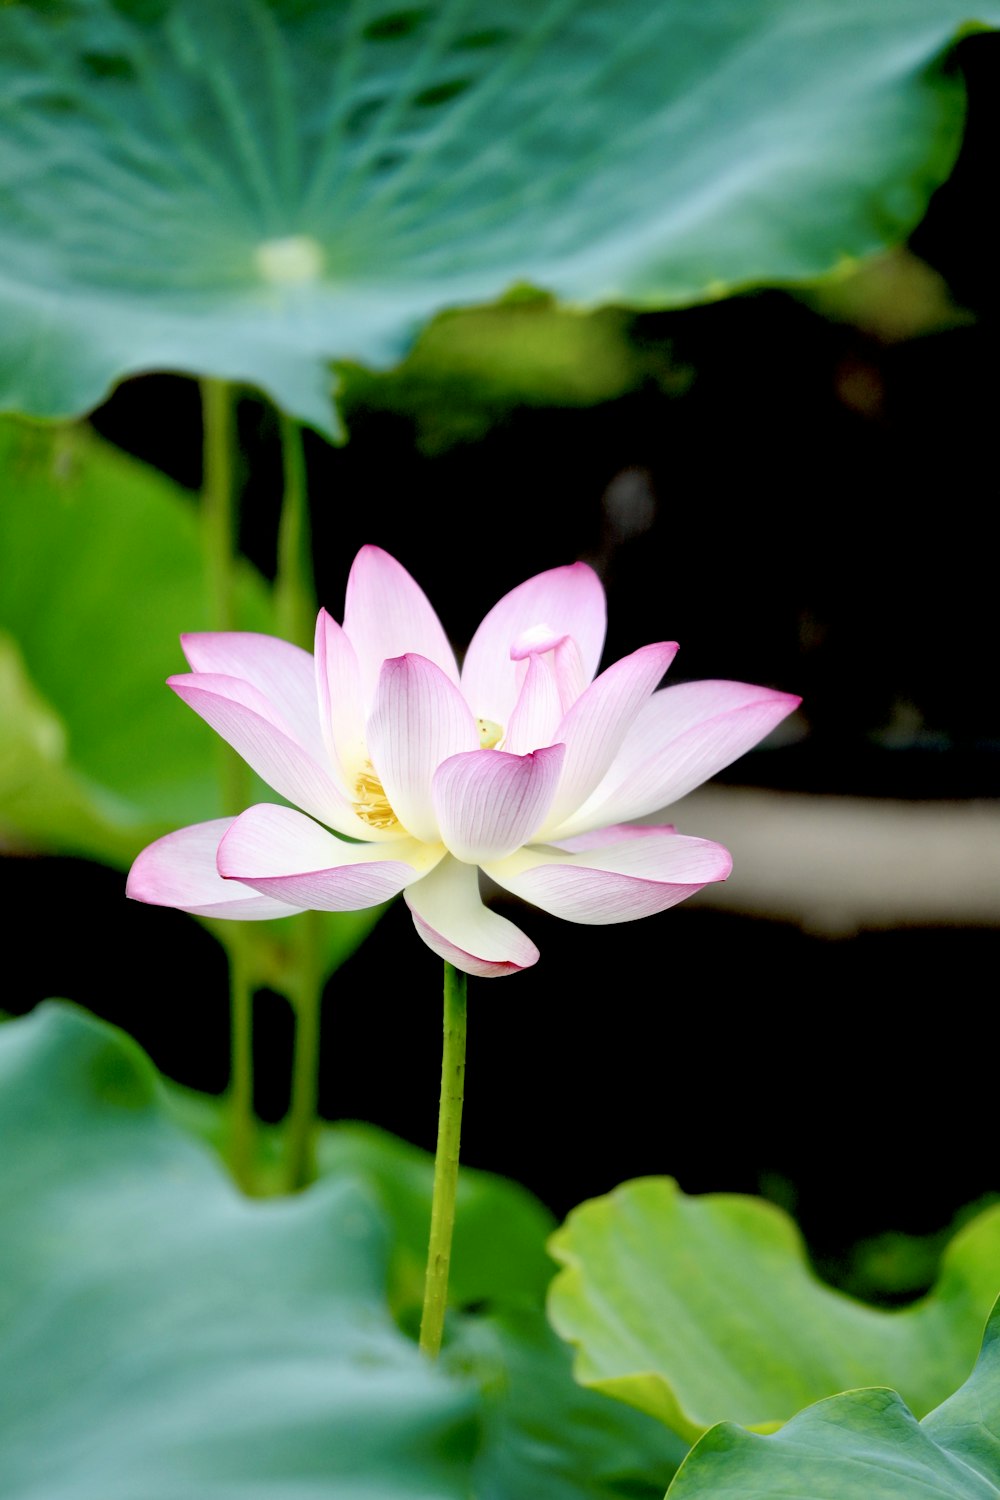 white and pink lotus flower close-up photography